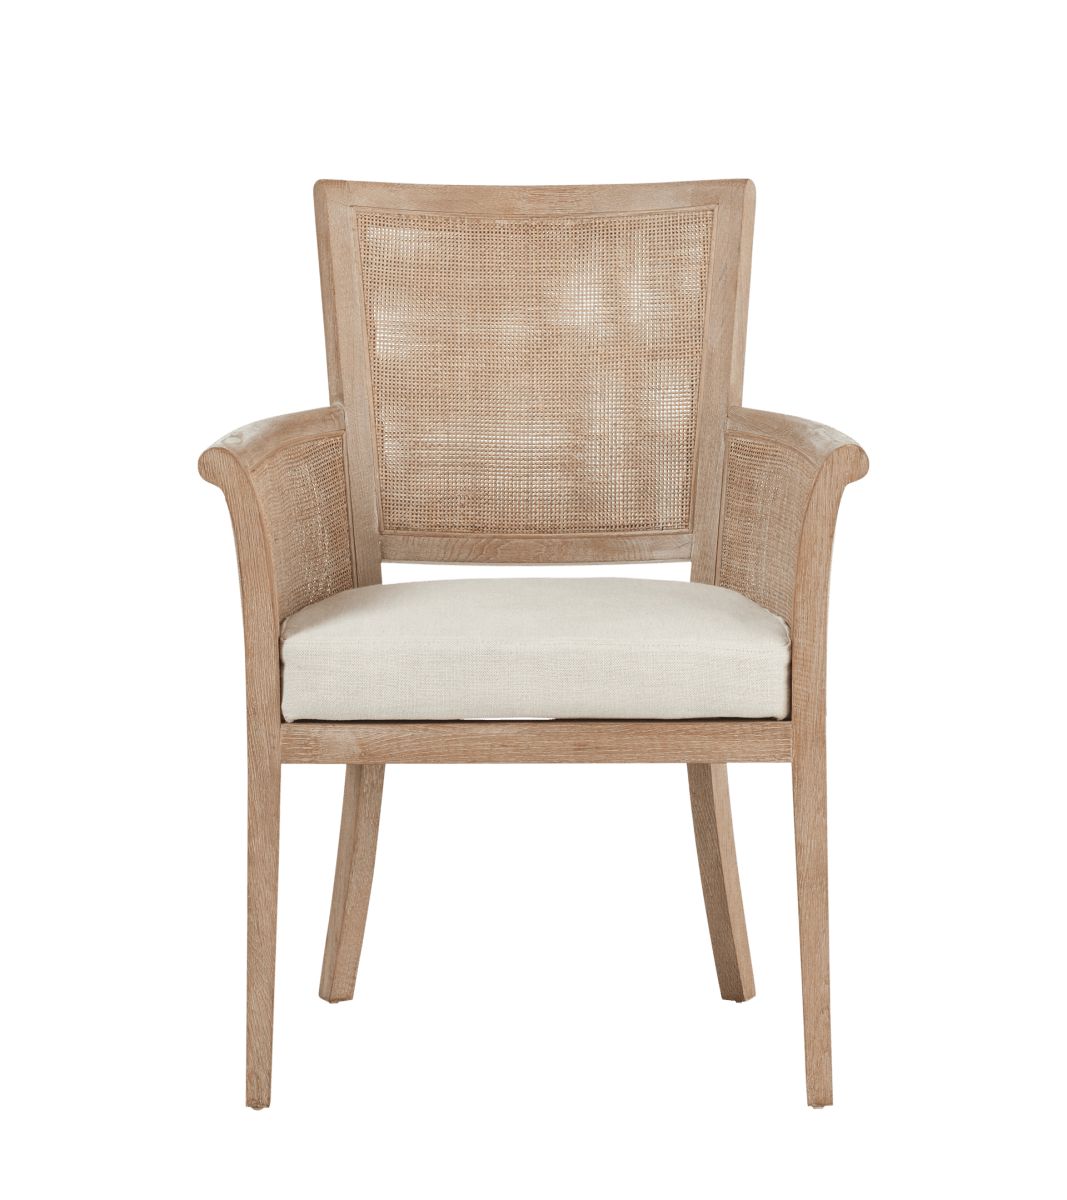 Ormoy Dining Chair - Natural | OKA US